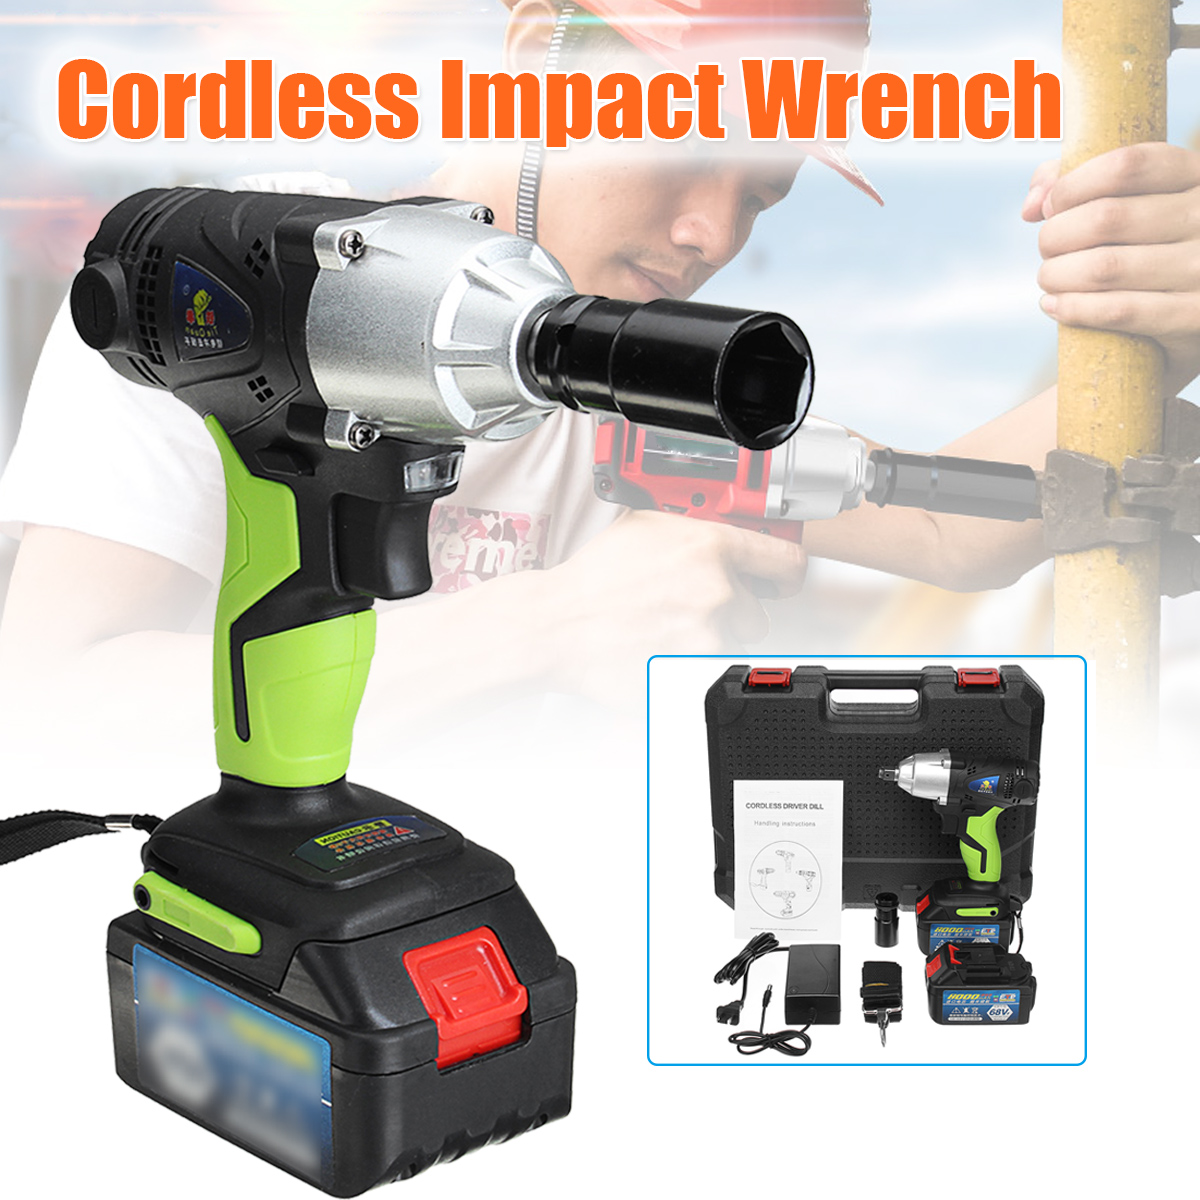 80Ah-68V-Cordless-Impact-Wrench-Li-ion-Power-Driver-Drill-Power-Wrench-Tools-1-Charger-2-Batteries-1286260-2